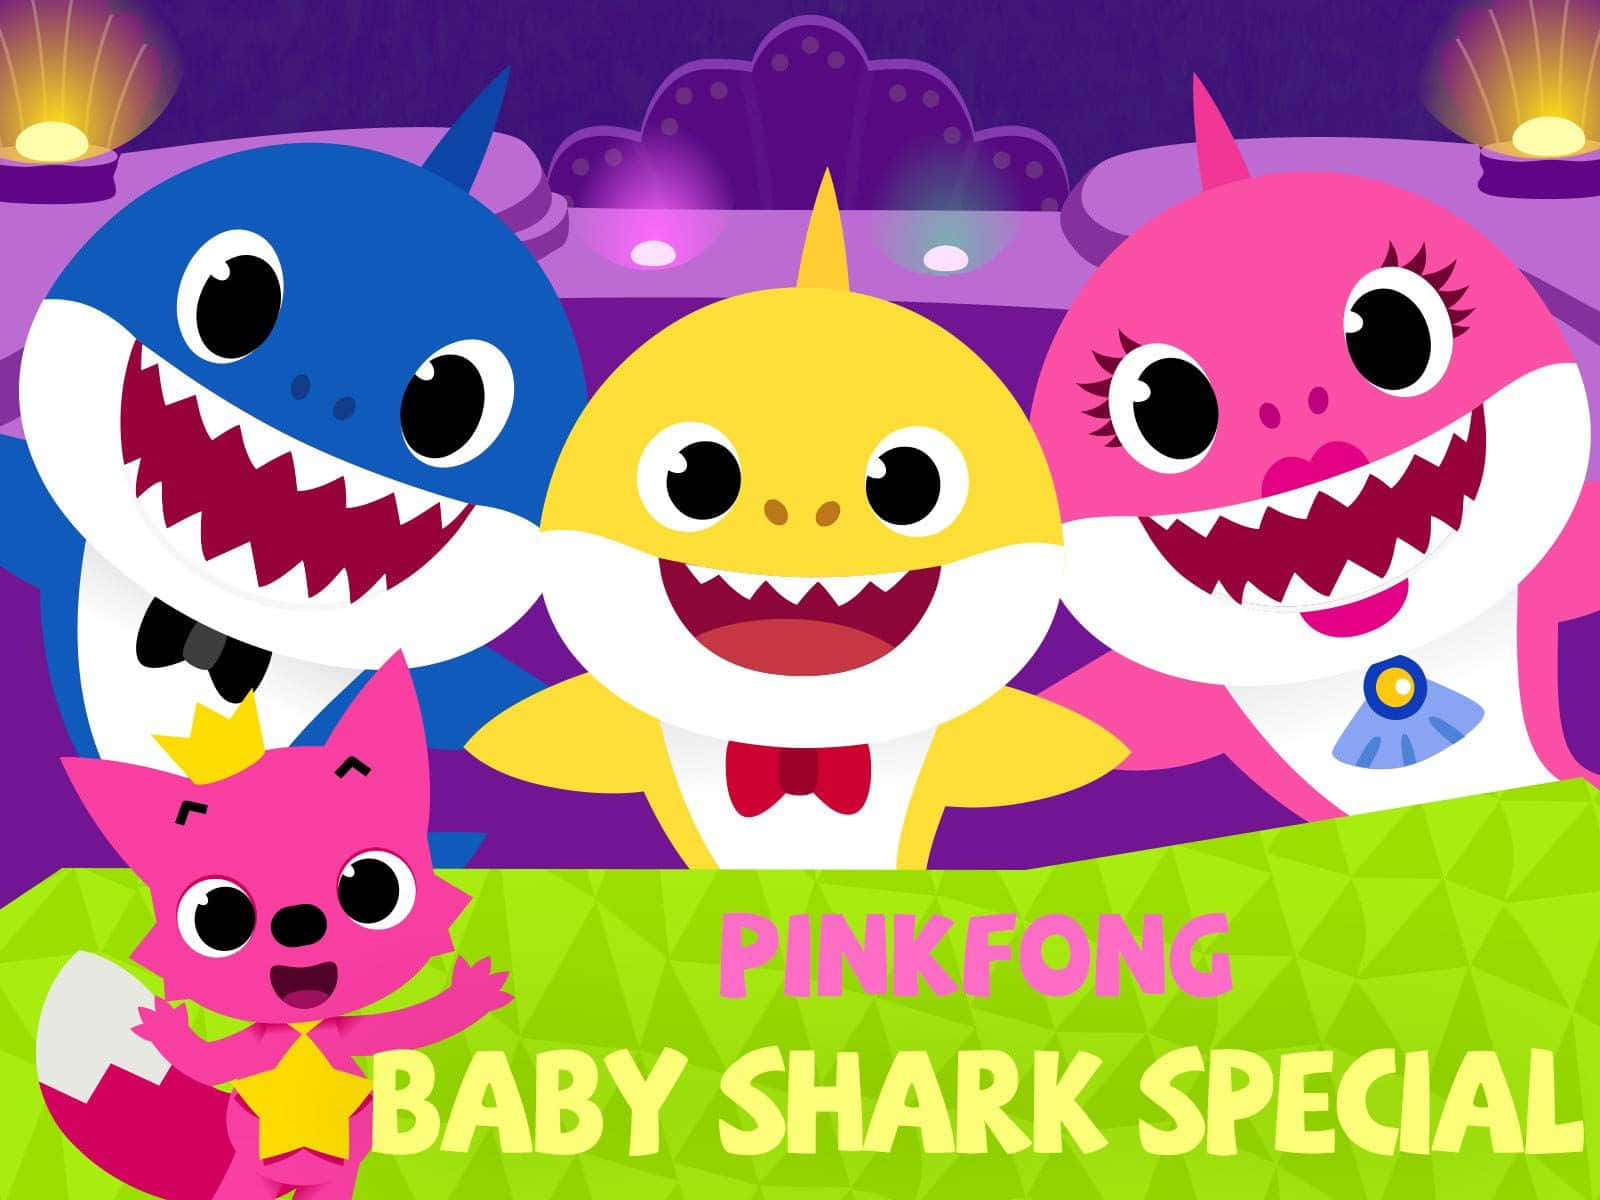 Looking closer at Baby Shark Picture